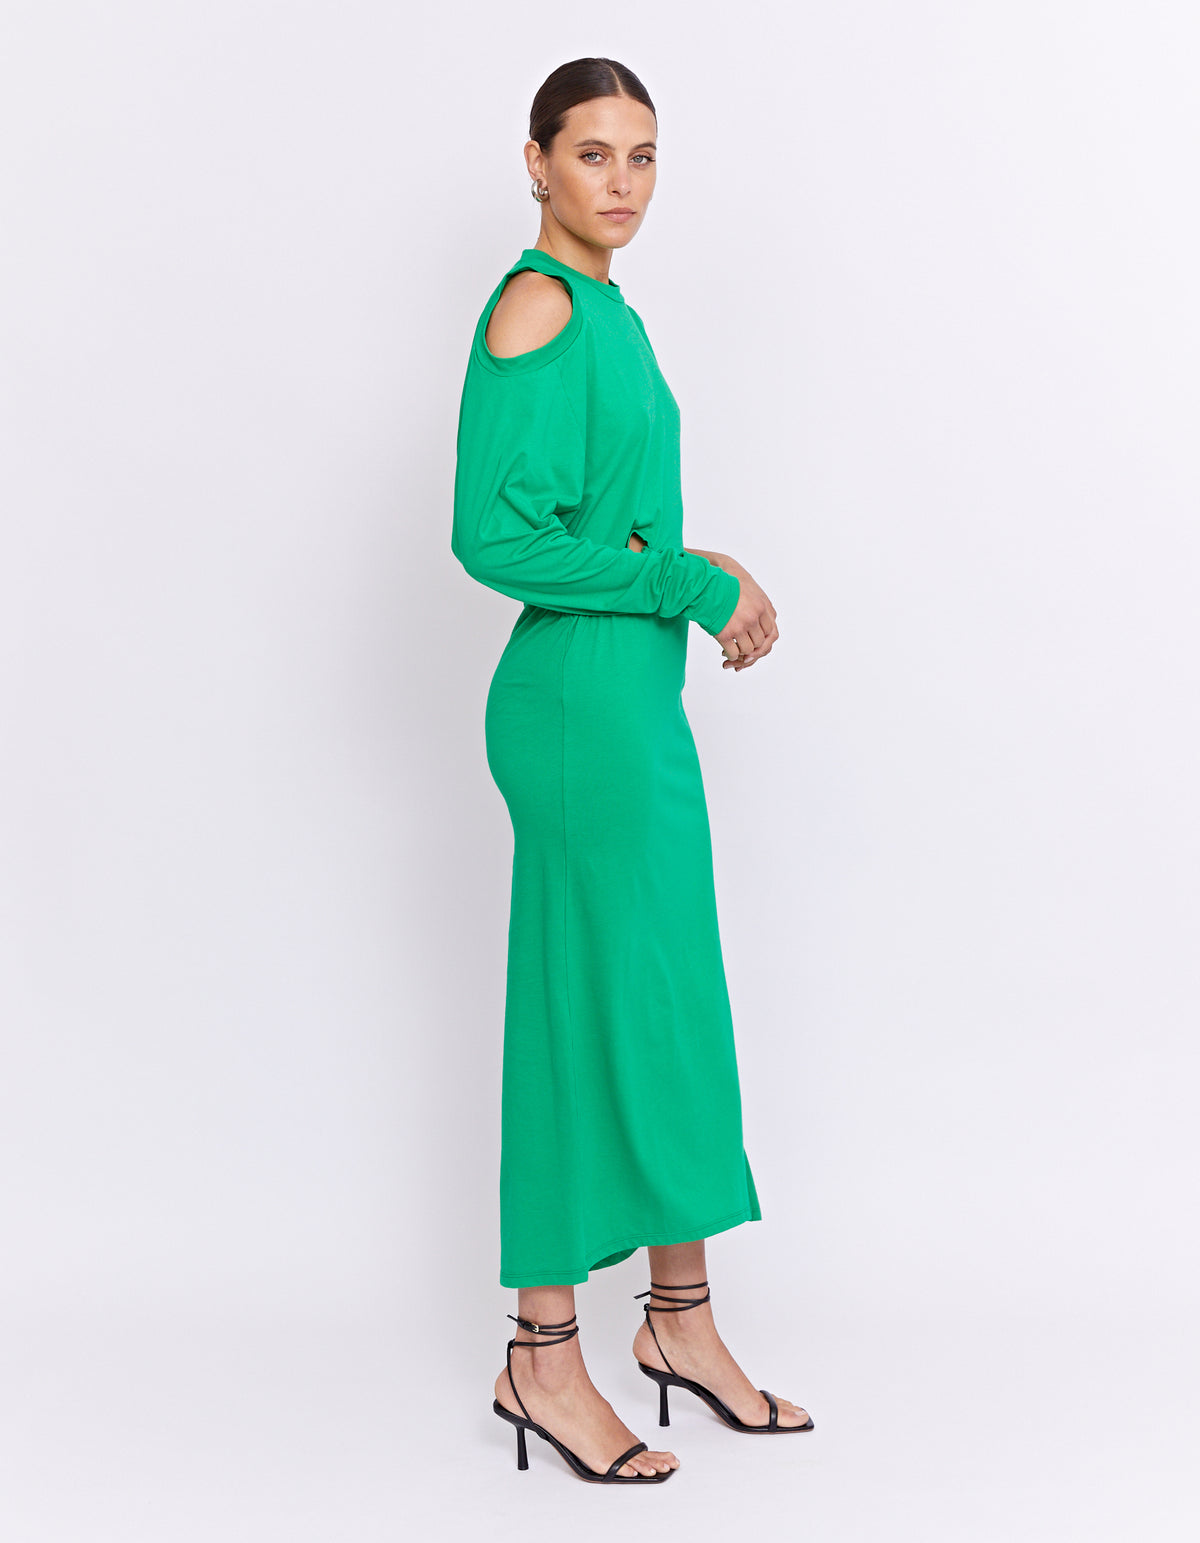 THE 808 TWO WAY DRESS | MOSS